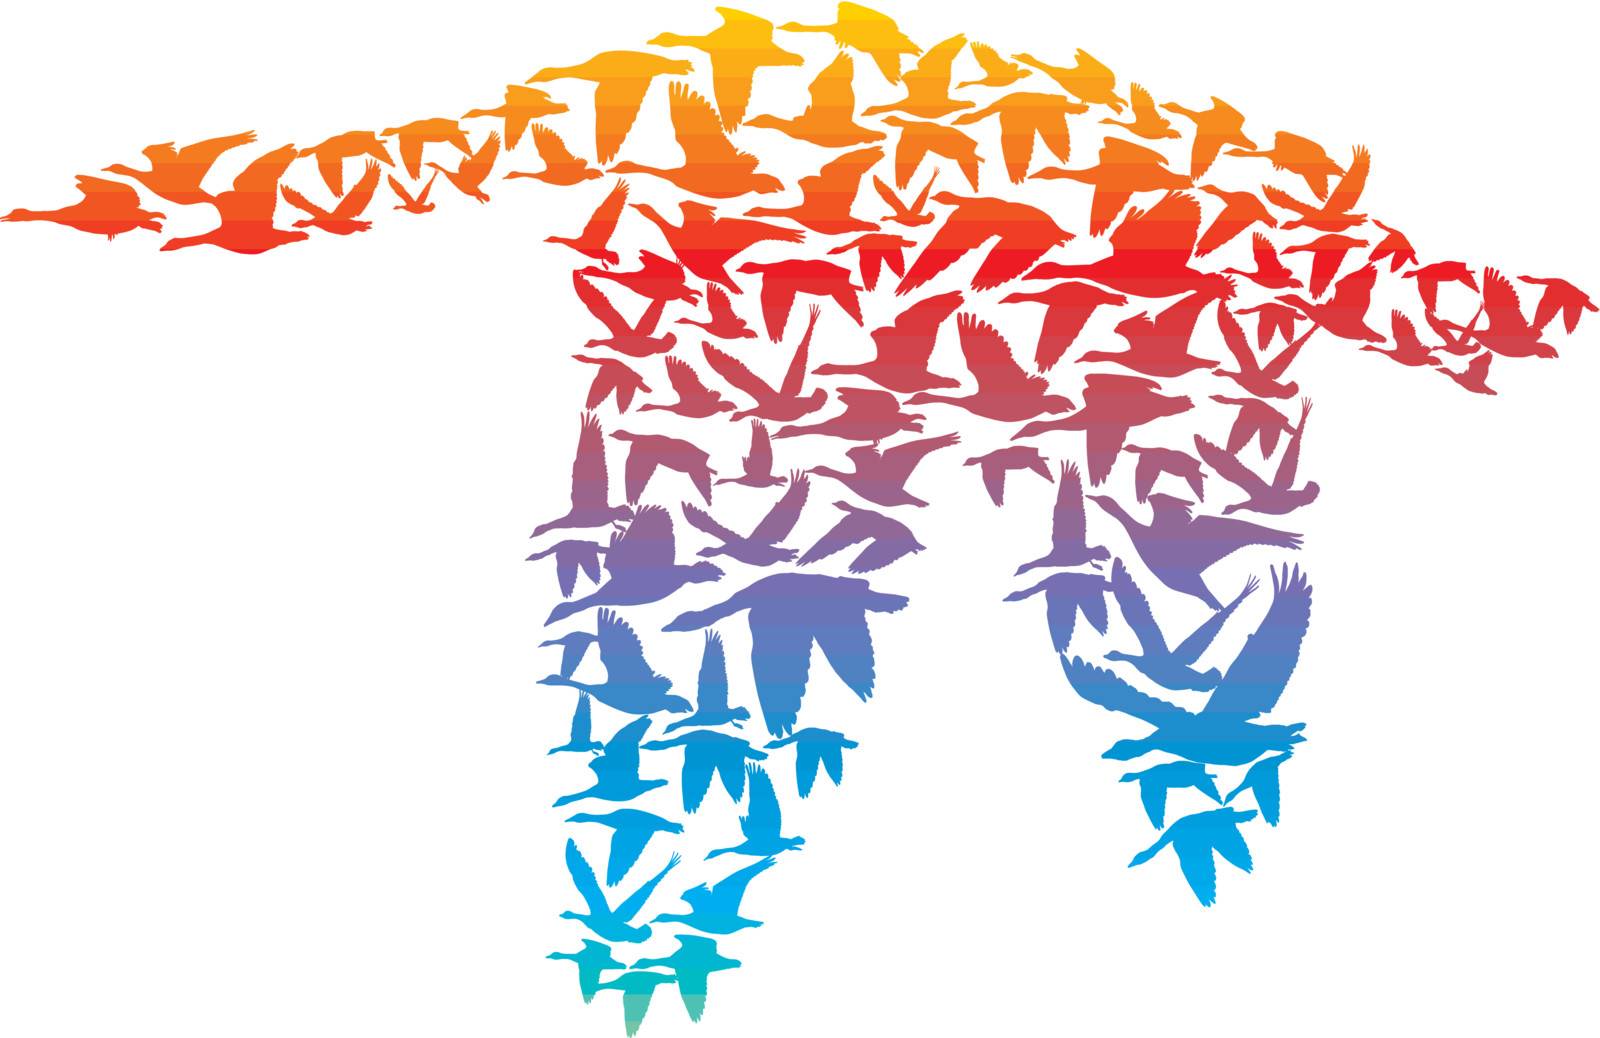 flying geese create a large silhouette of geese, vector illustration